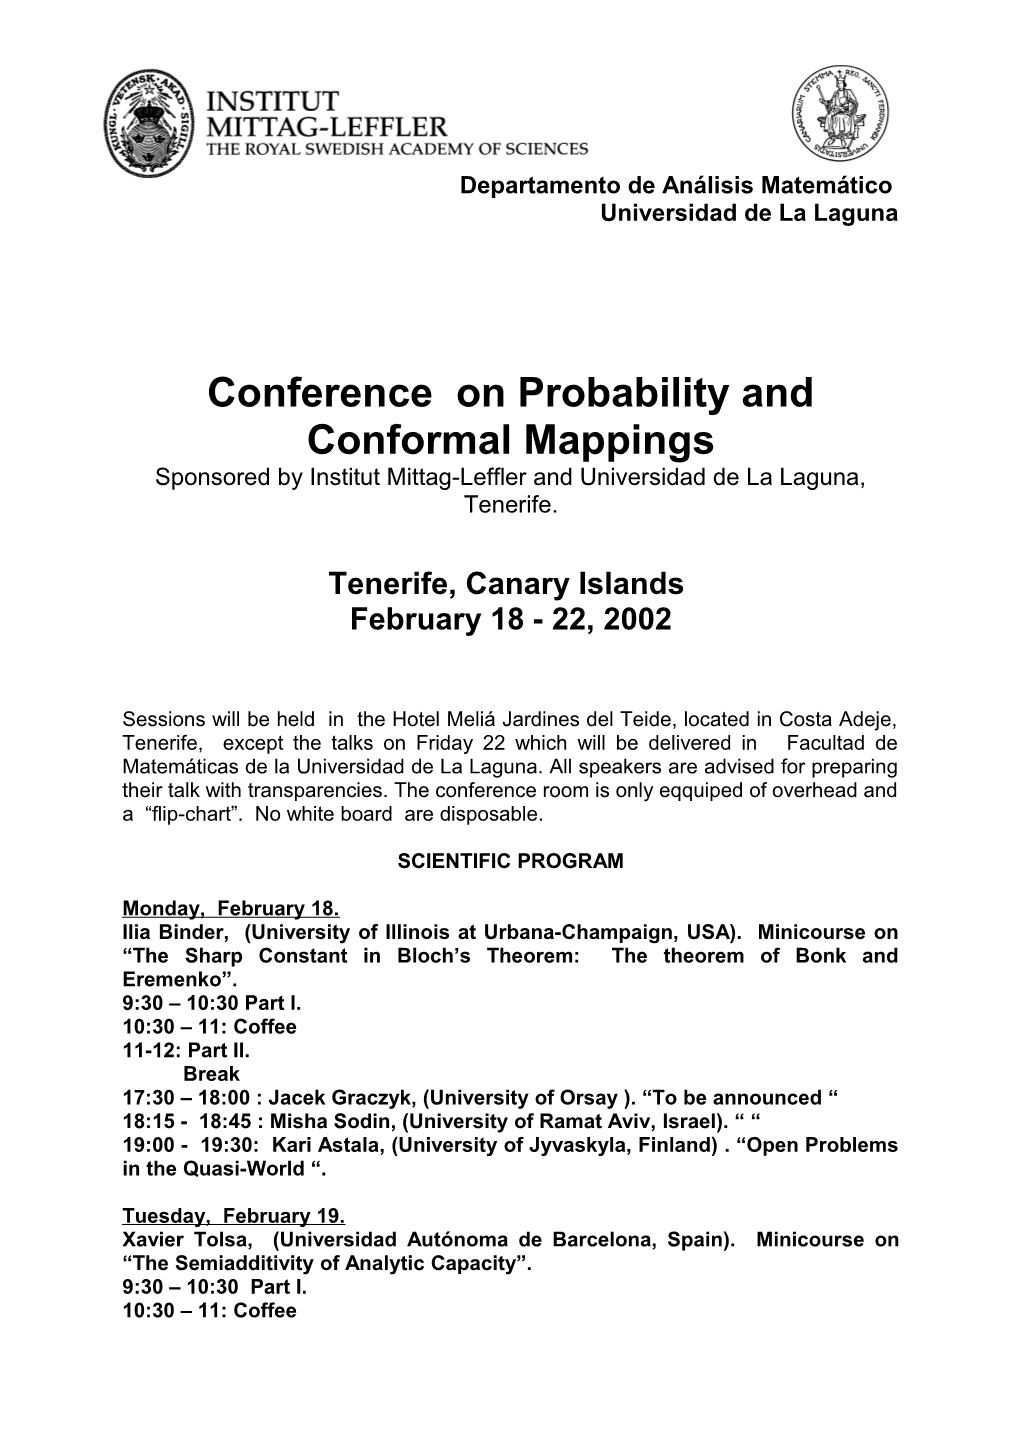 Meeting on Probablity and Conformal Mappings